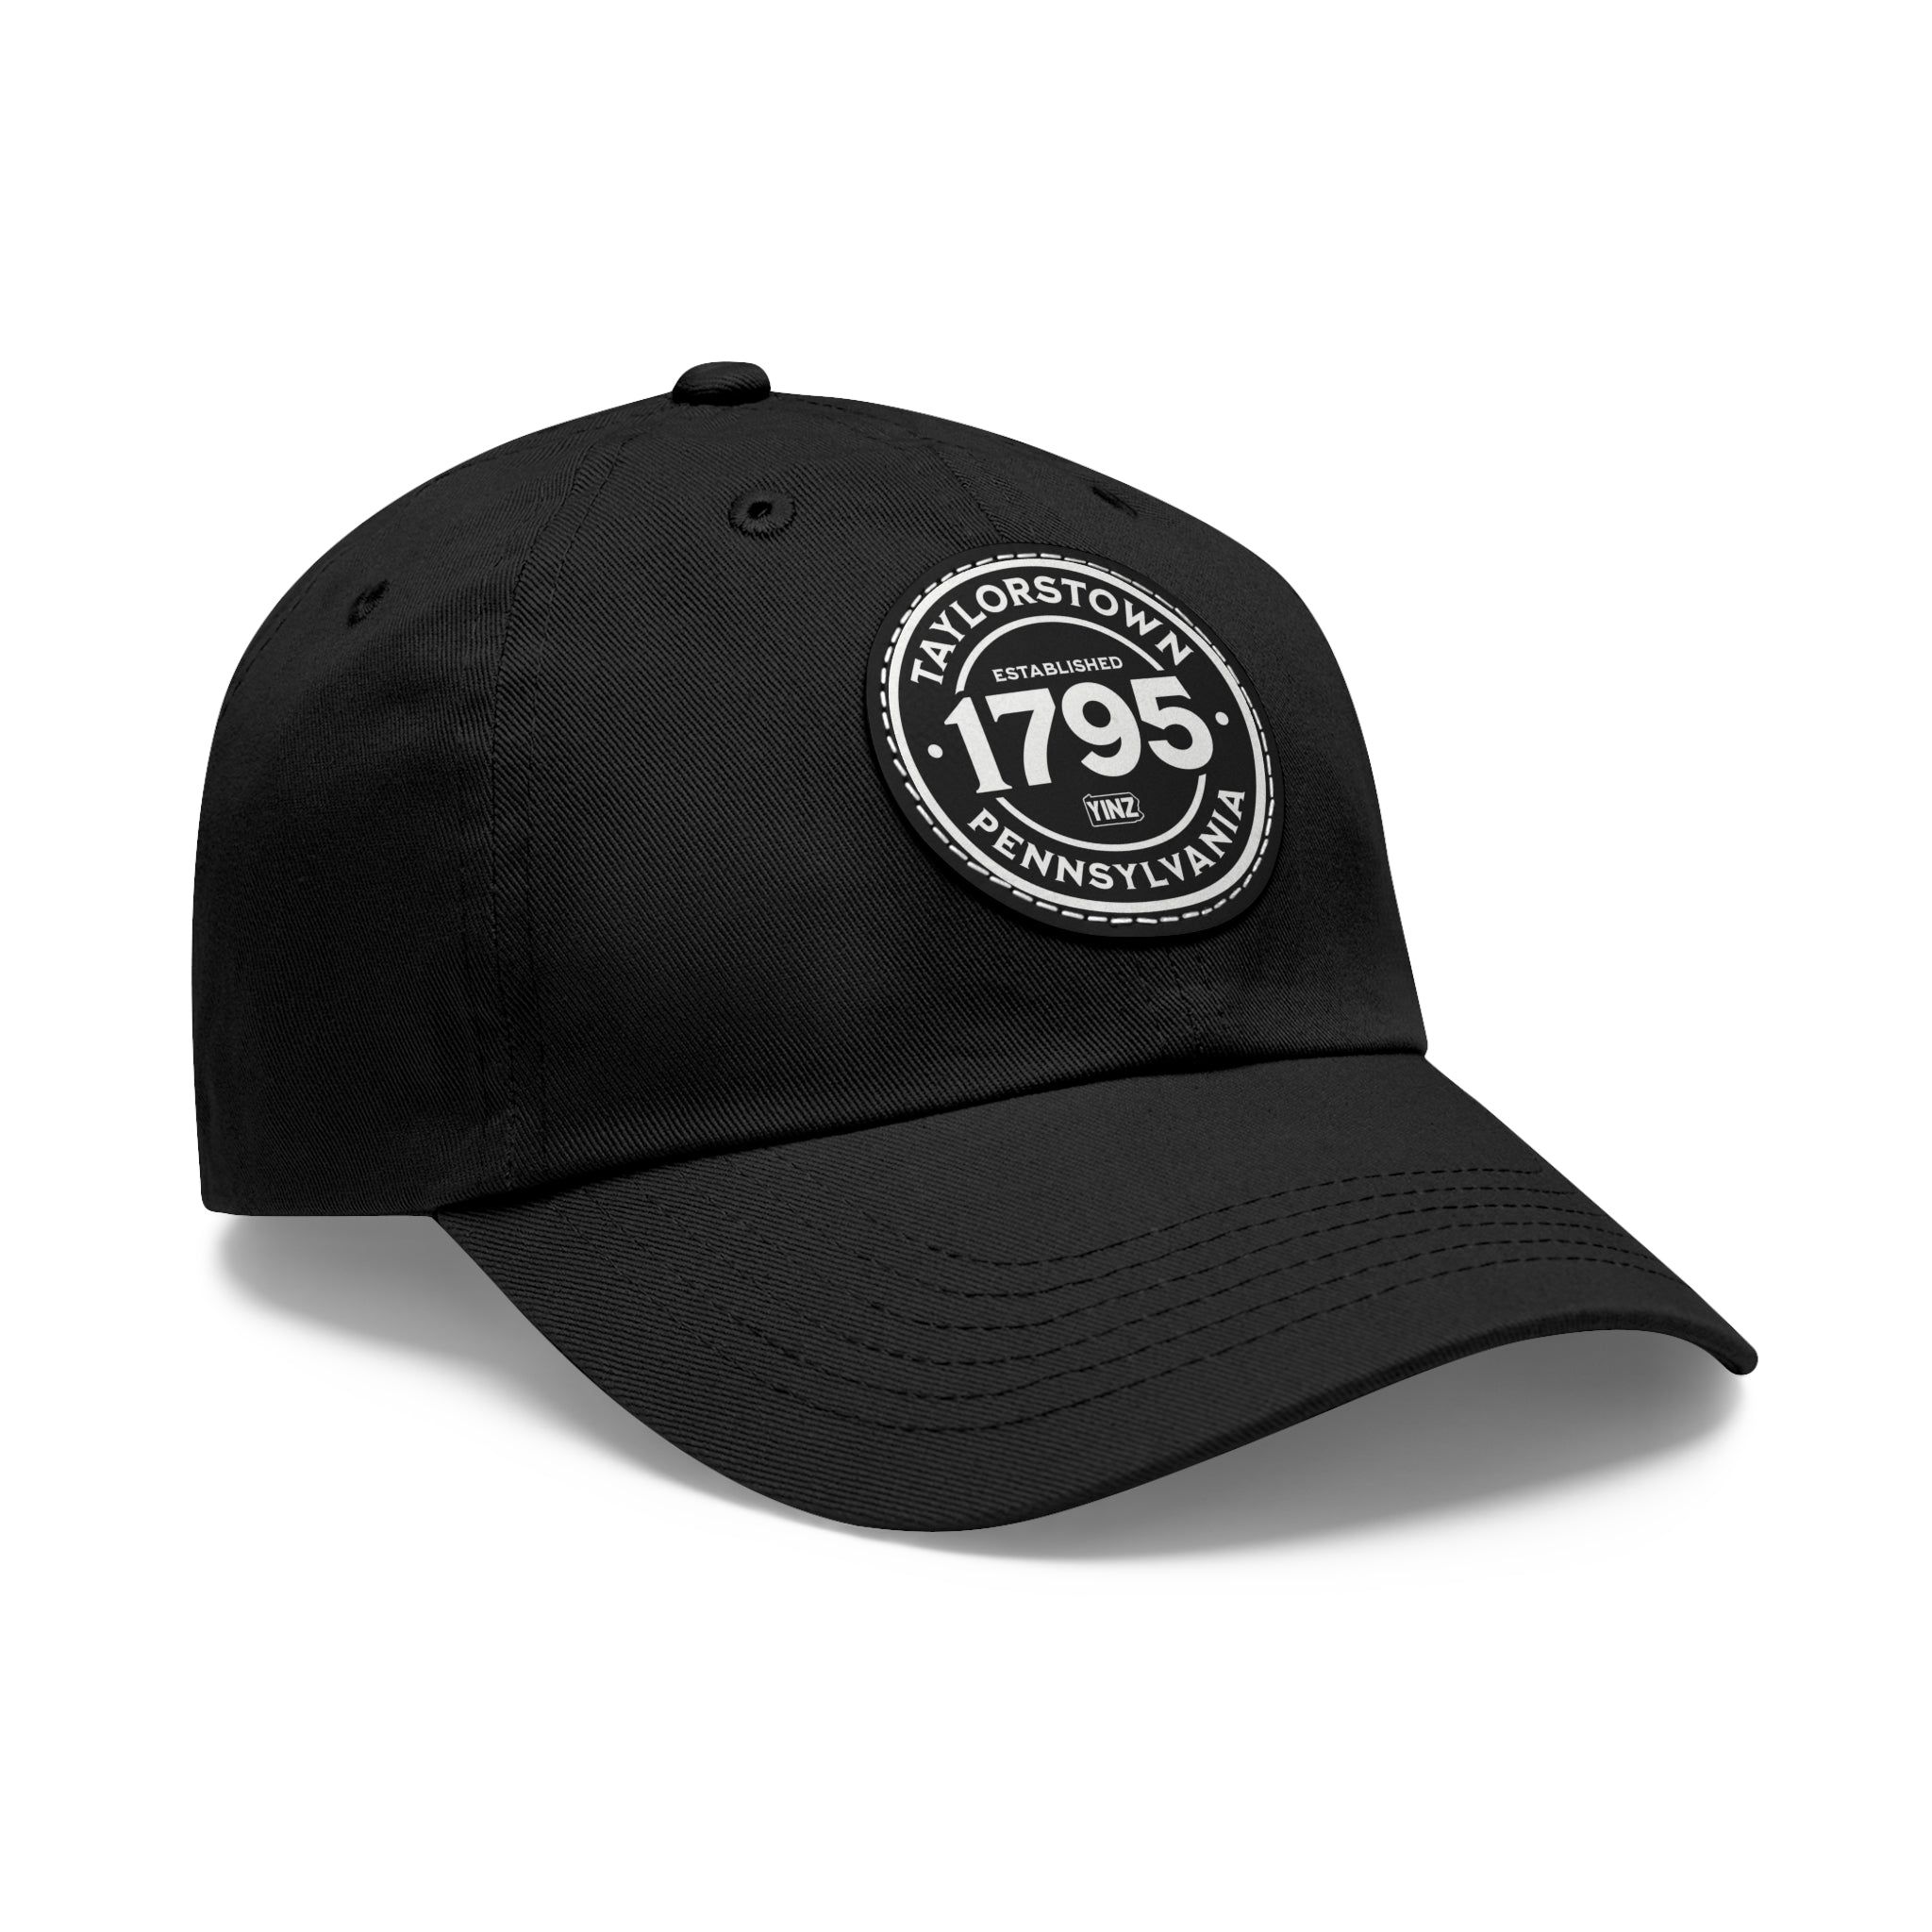 Taylorstown PA - 1795 - Founders Patch Hat